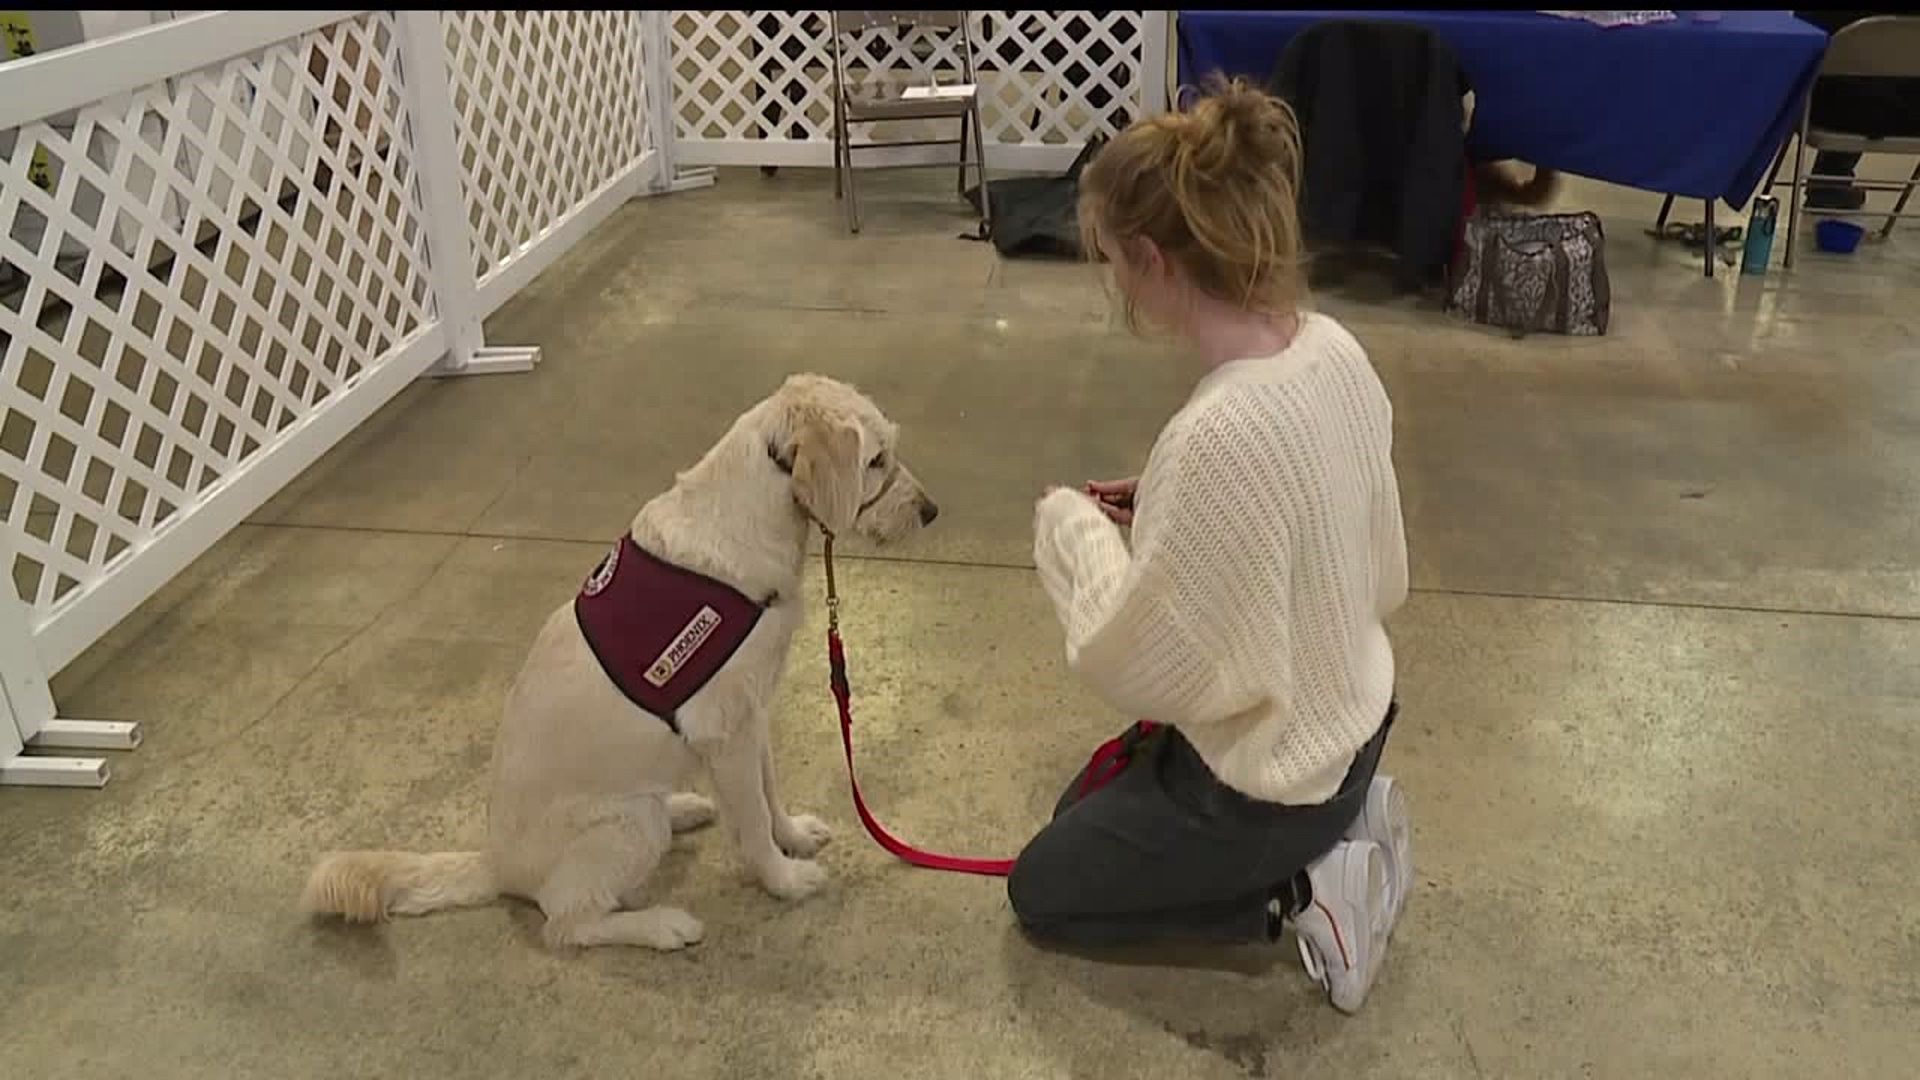 Organization trains puppies to become assistance dogs for people with disabilities